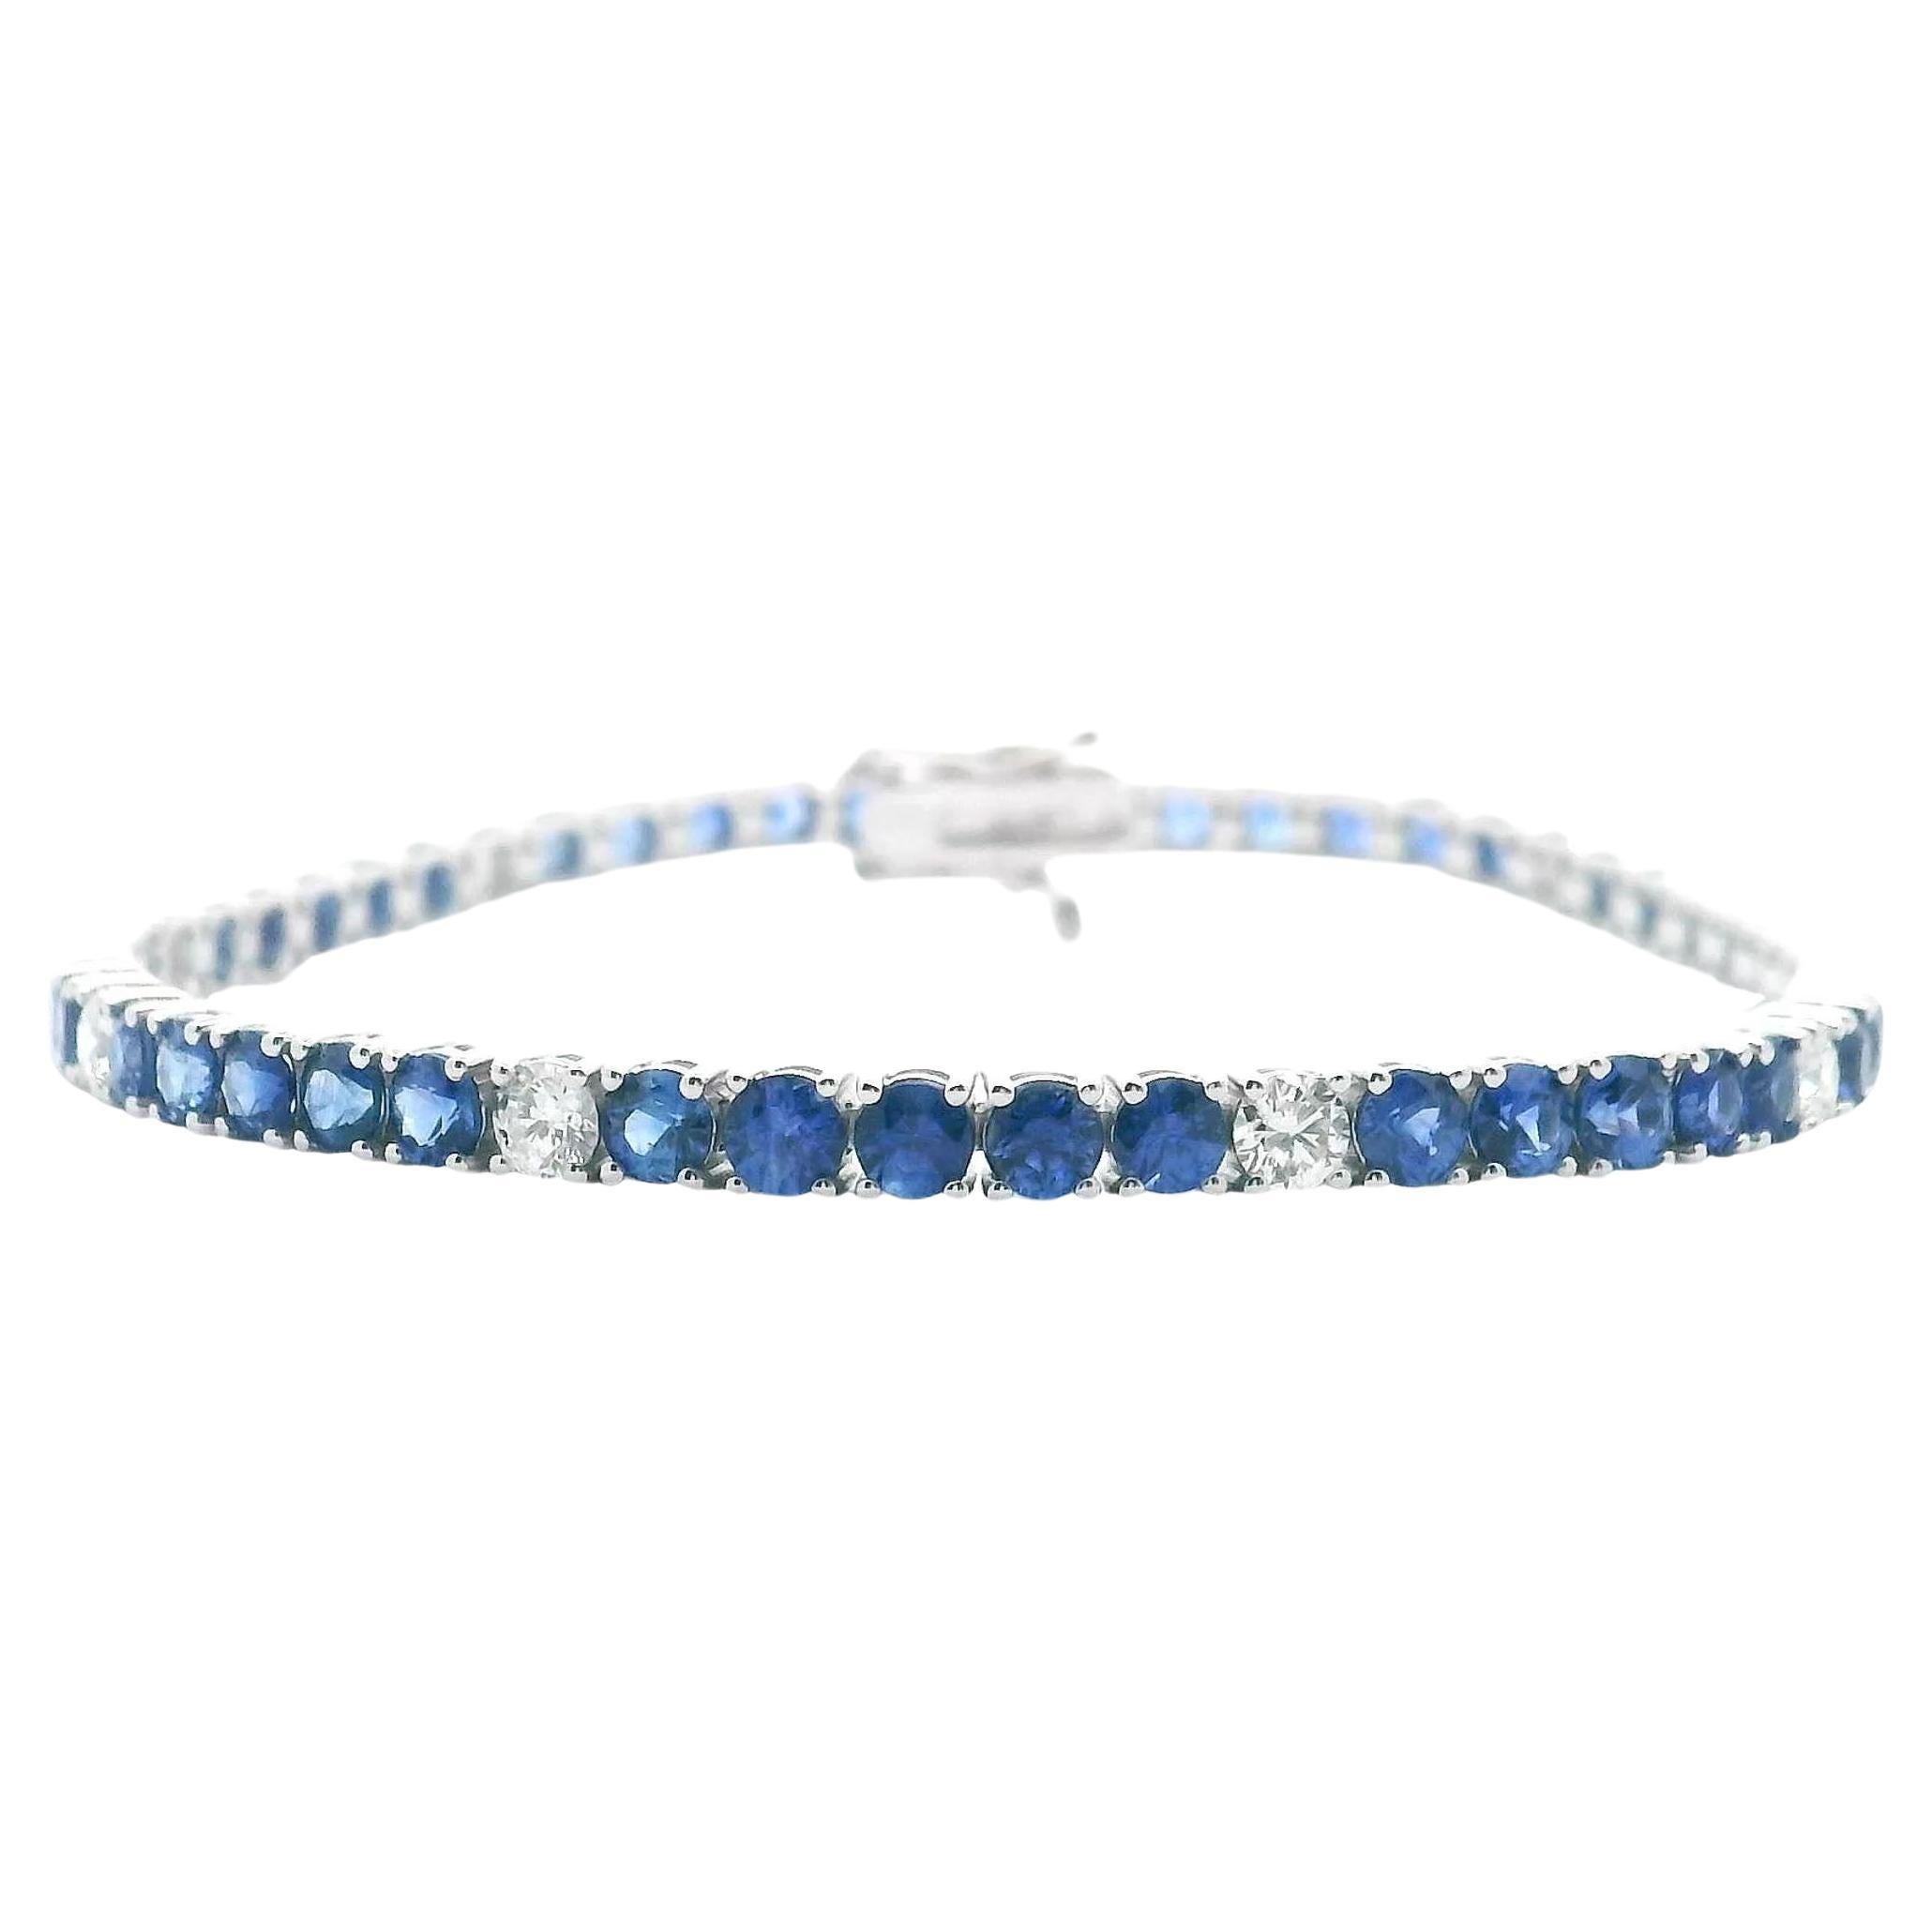 14K White Gold Tennis Bracelet with Sapphires and Diamonds